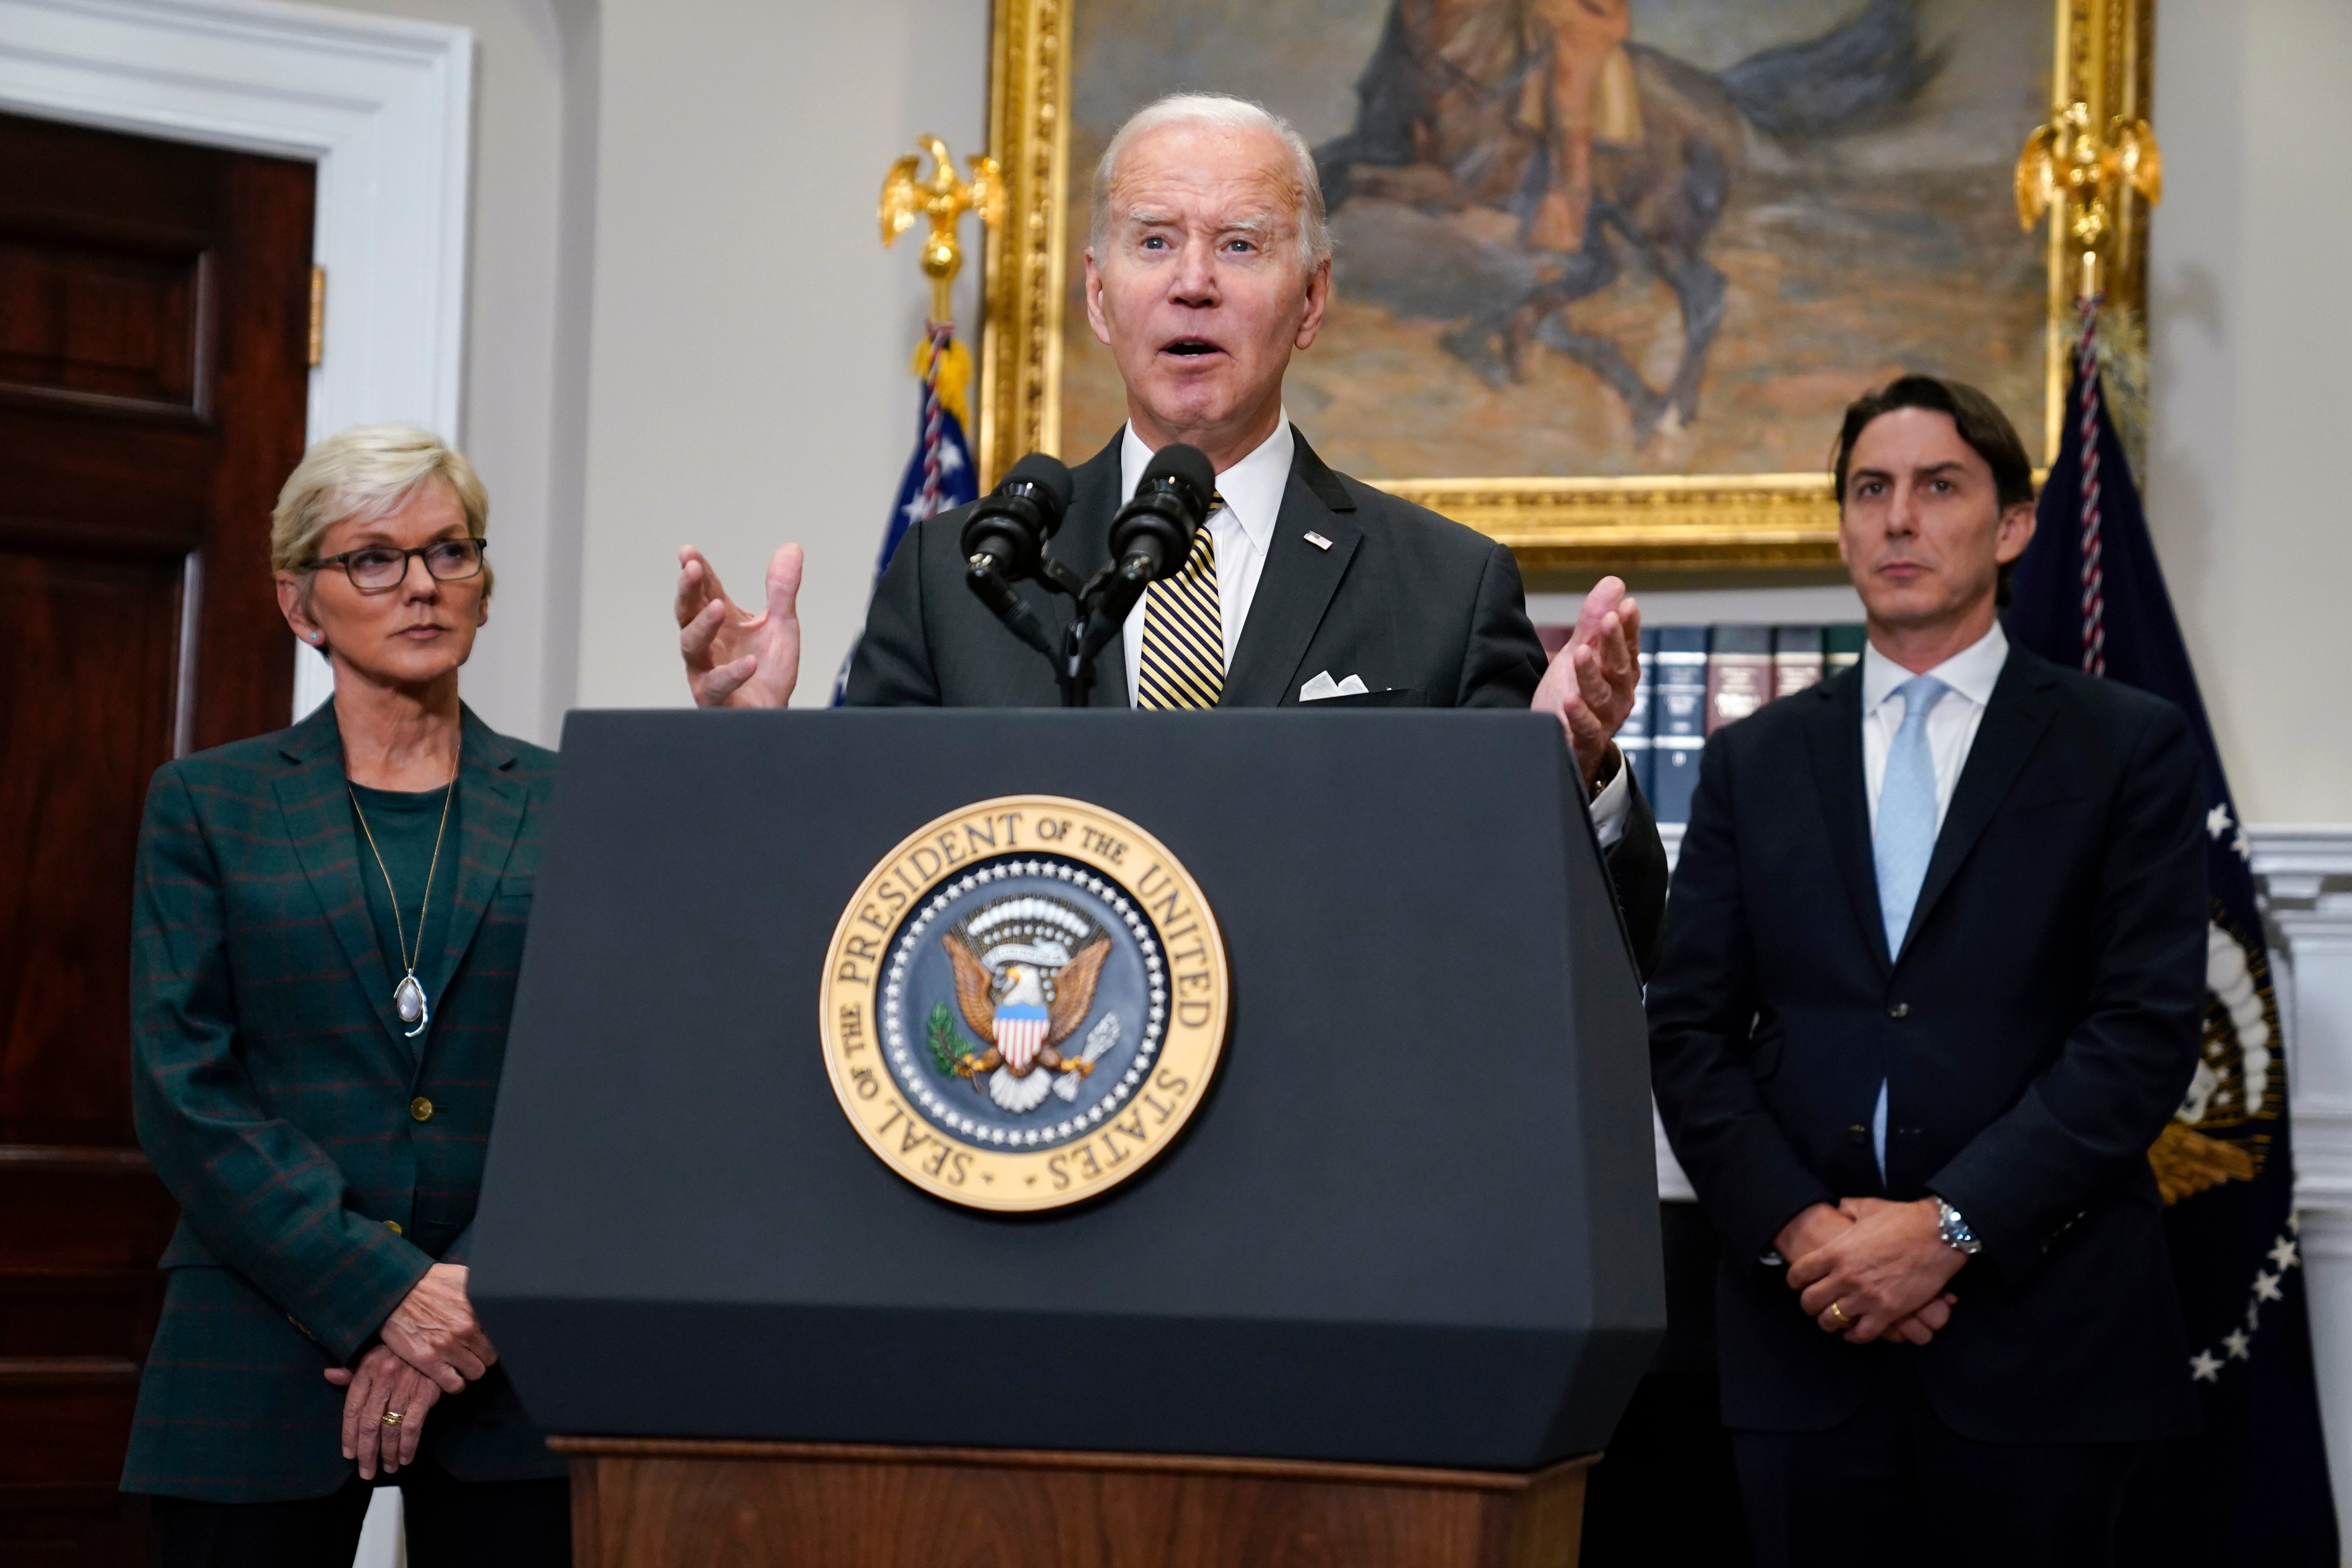 Energy Secretary Jennifer Granholm, left, and Special Presidential Coordinator Amos Hochstein, right, listen as President Joe Biden speaks about energy and the Strategic Petroleum Reserve during an event in the Roosevelt Room of the White House, Wednesday, Oct. 19, 2022, in Washington. (AP Photo/Evan Vucci)